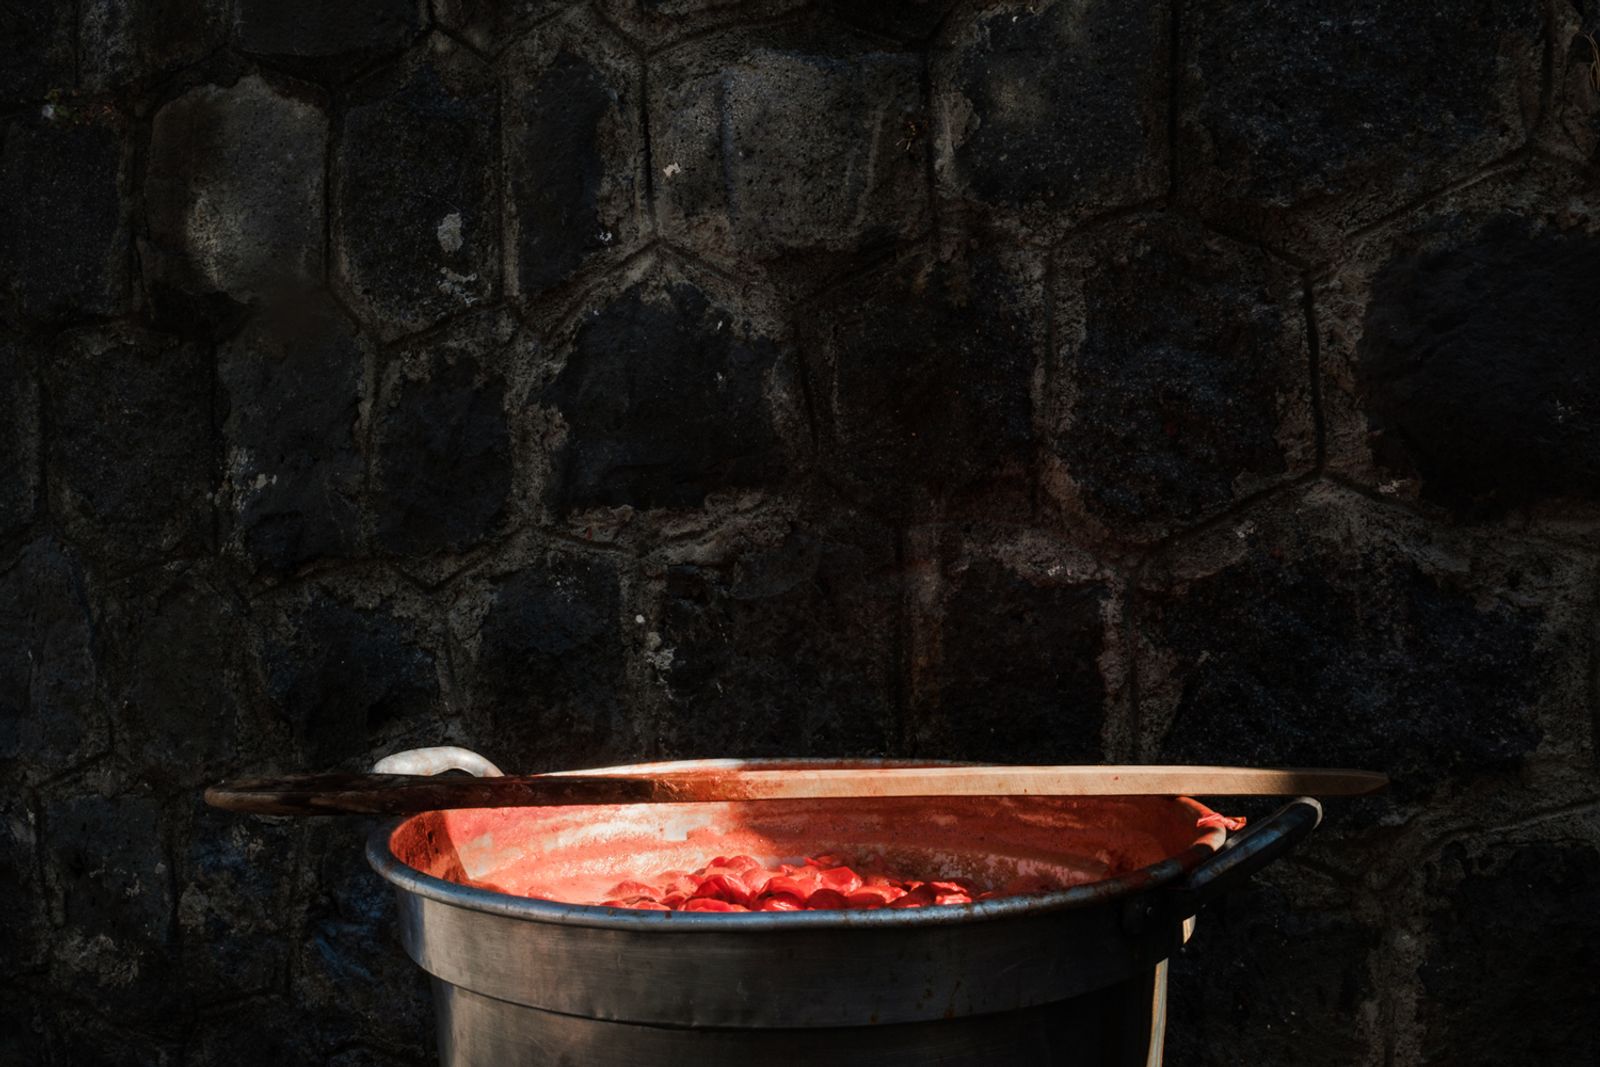 © Claire Power - A cauldron for boiling tomatoes. Every summer around August families get together for a few full days to make passata